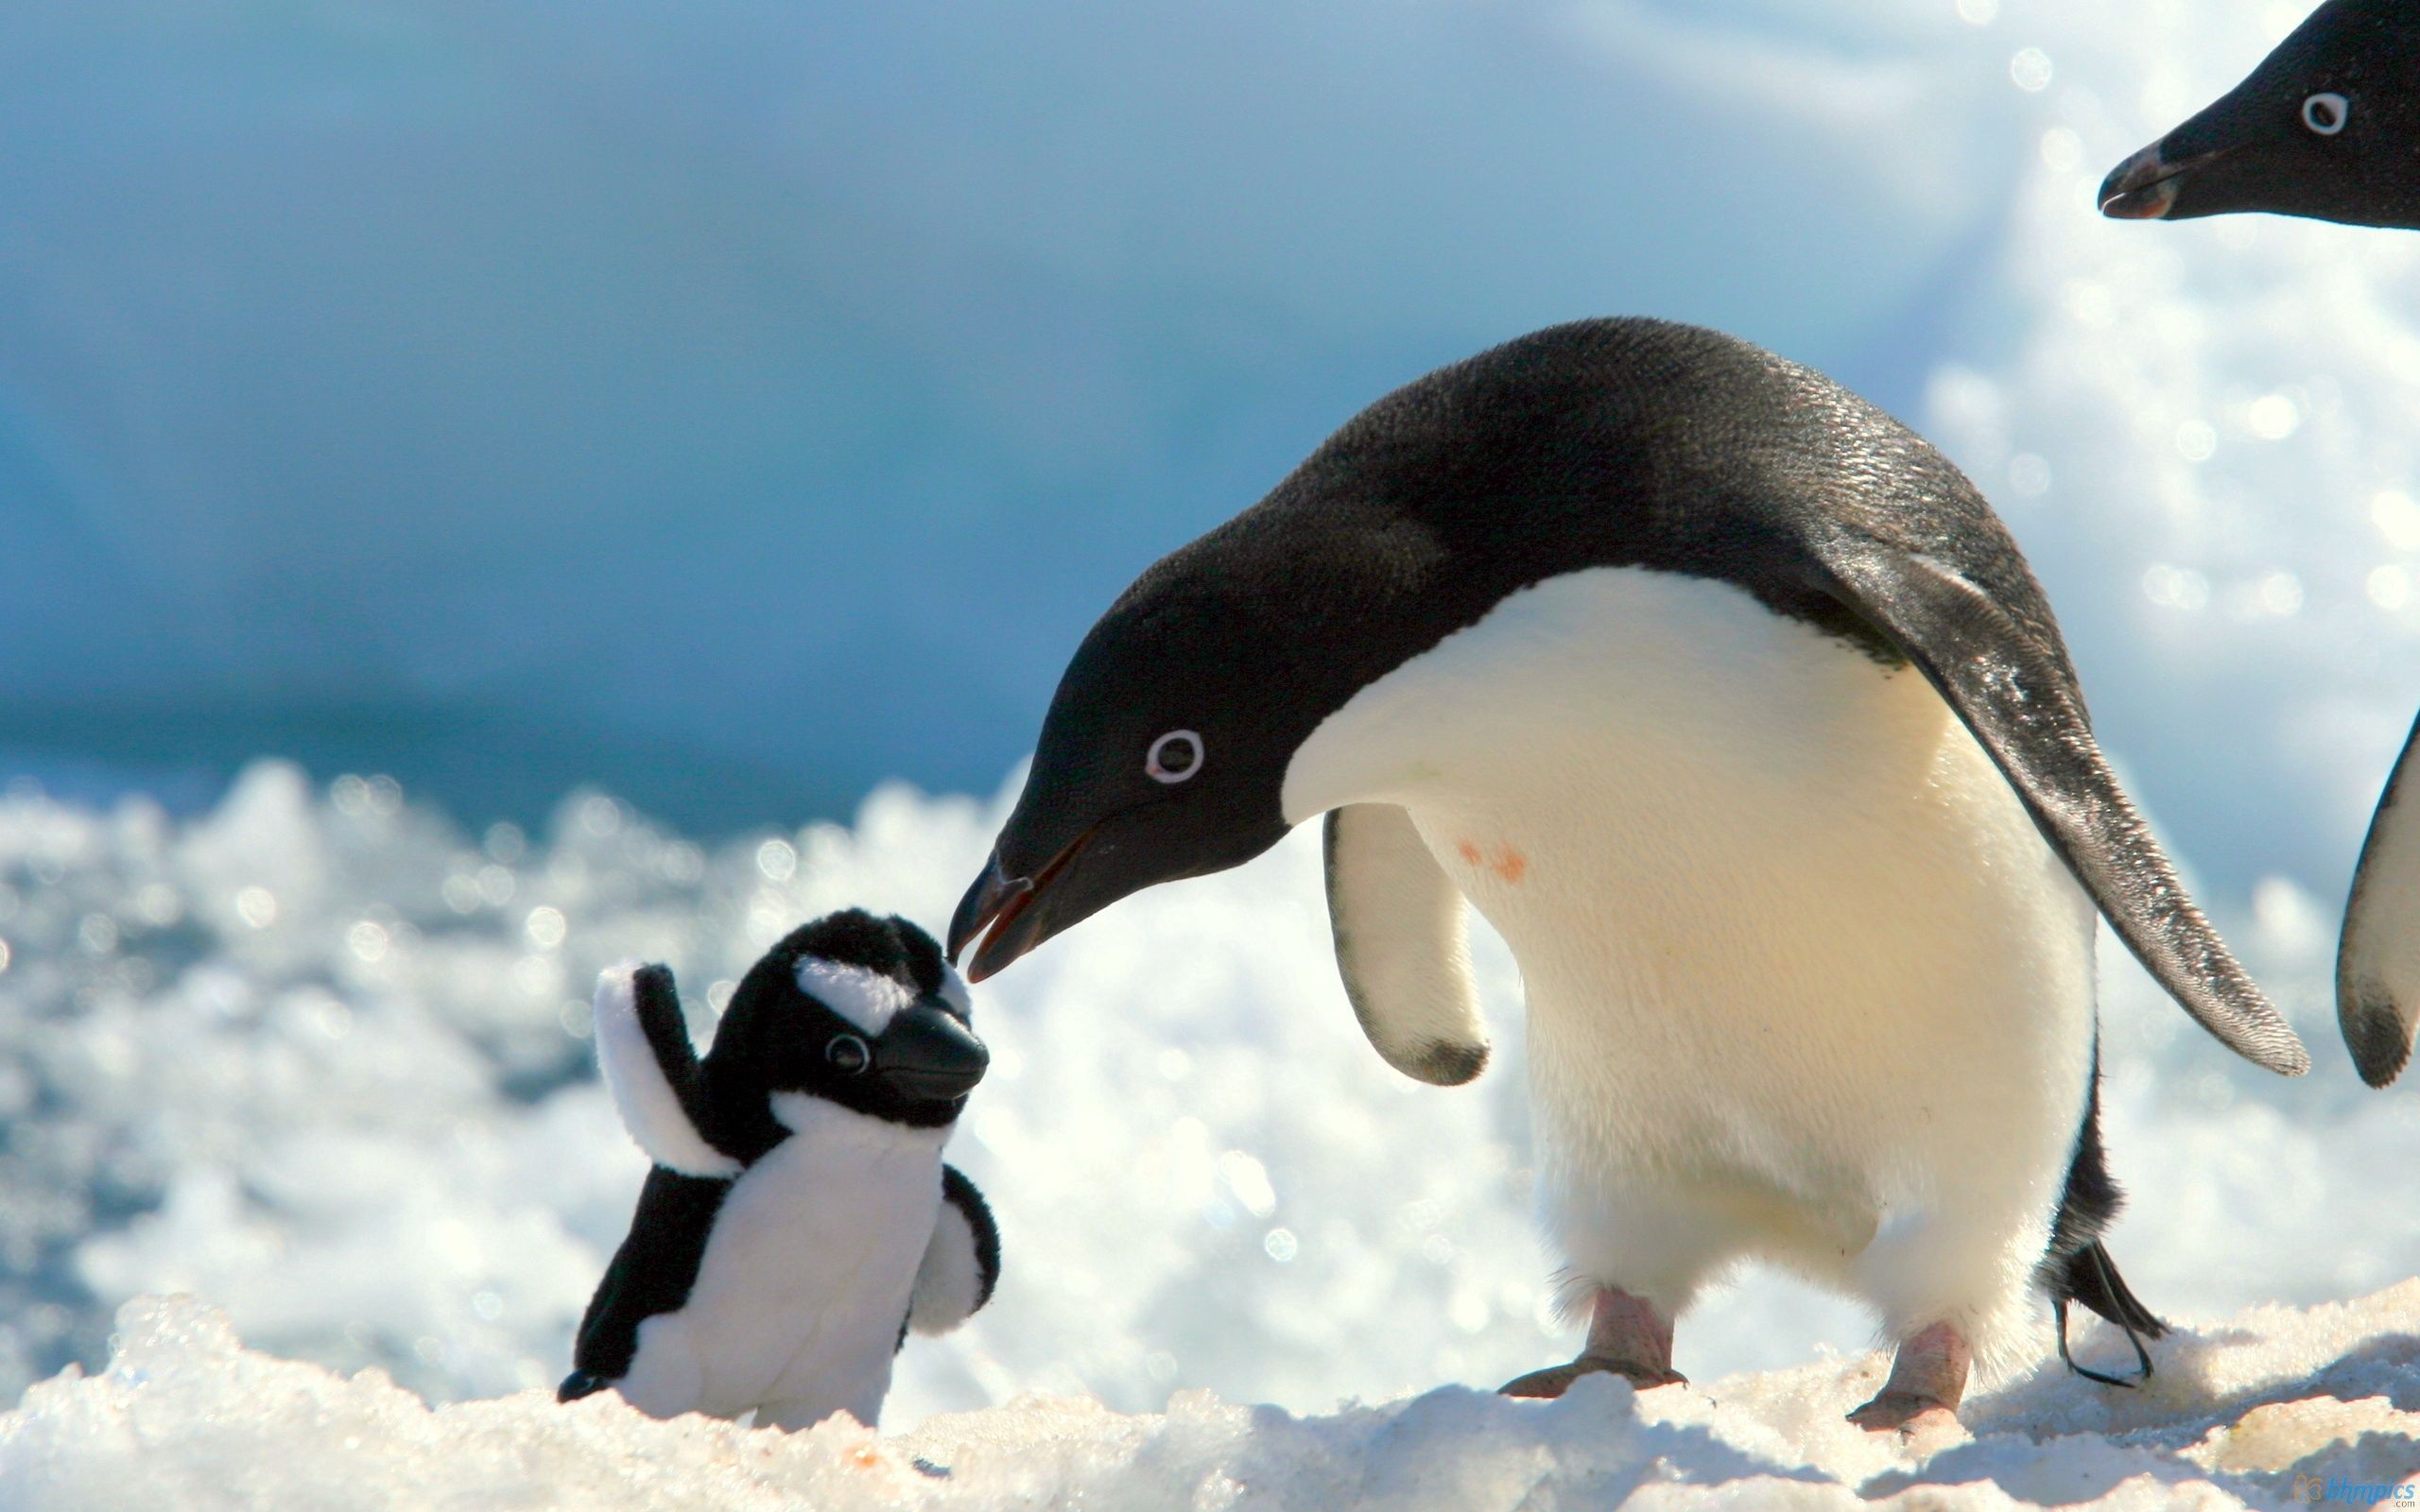 care, animals, pinguins, snow, young, joey High Definition image